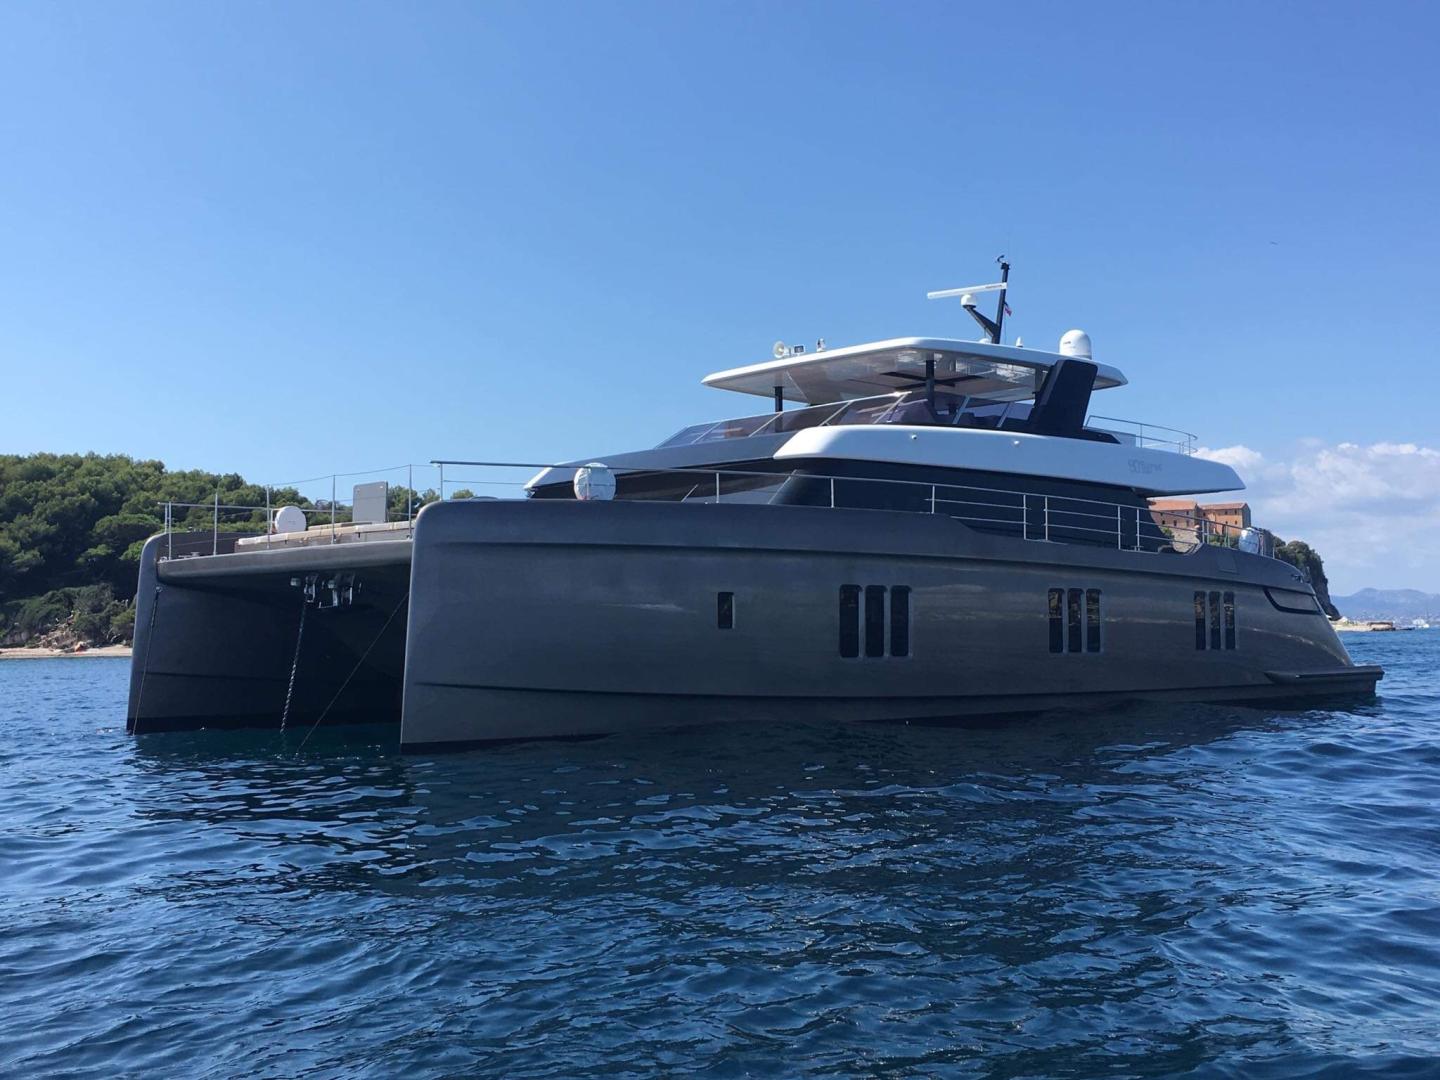 The 80 Sunreef Power Unveiled at the Cannes Yachting Festival 2019